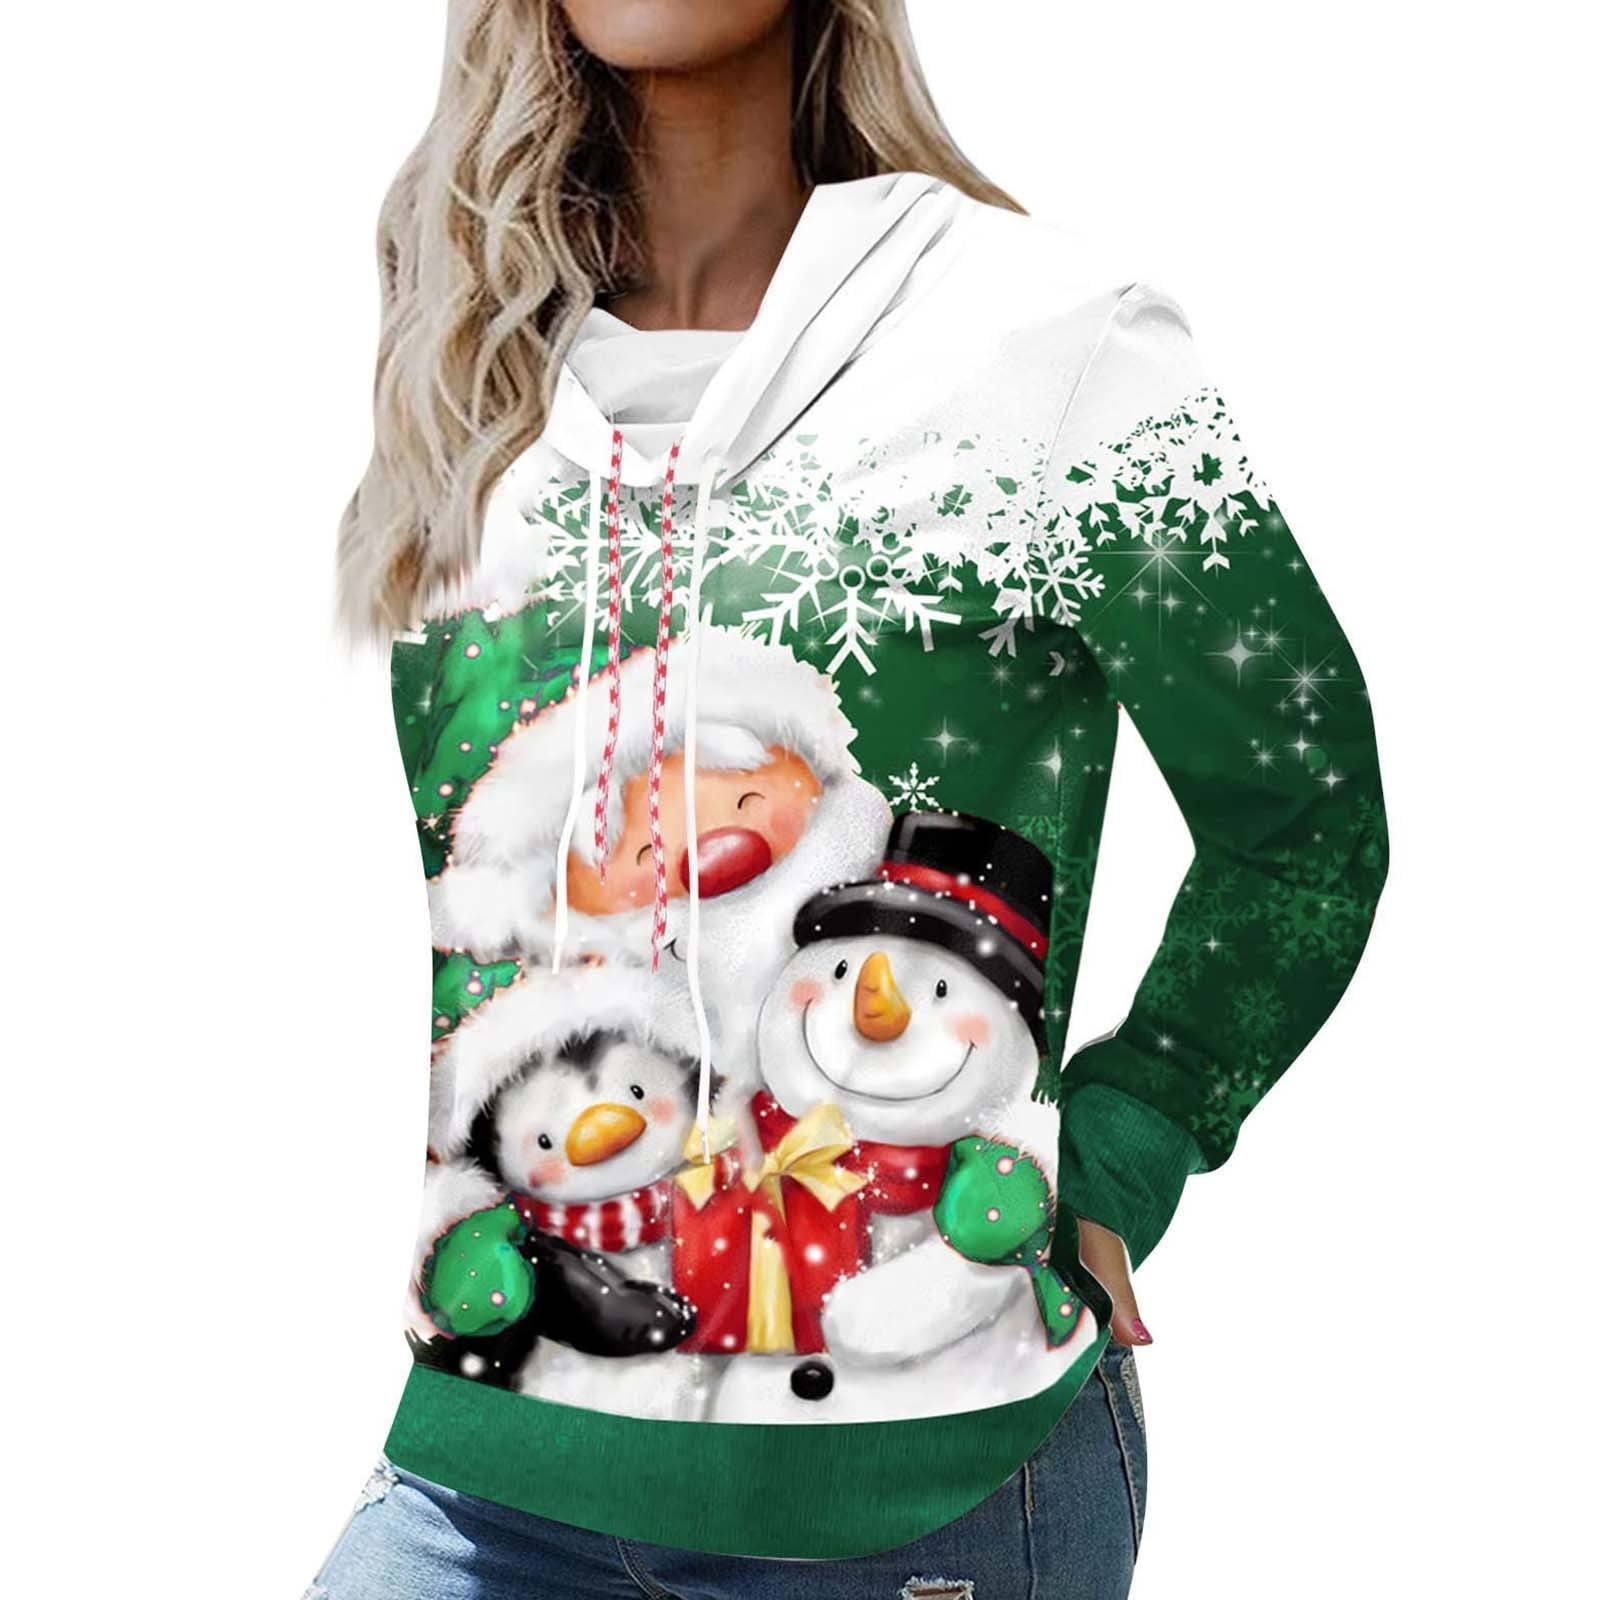 Women's Pullover Hoodies Plaid H Print Christmas Print Button Down,specials  of the day,add on items under 1 dollar,deals of the day lightning deals  today prime clearance,delivery today items prime